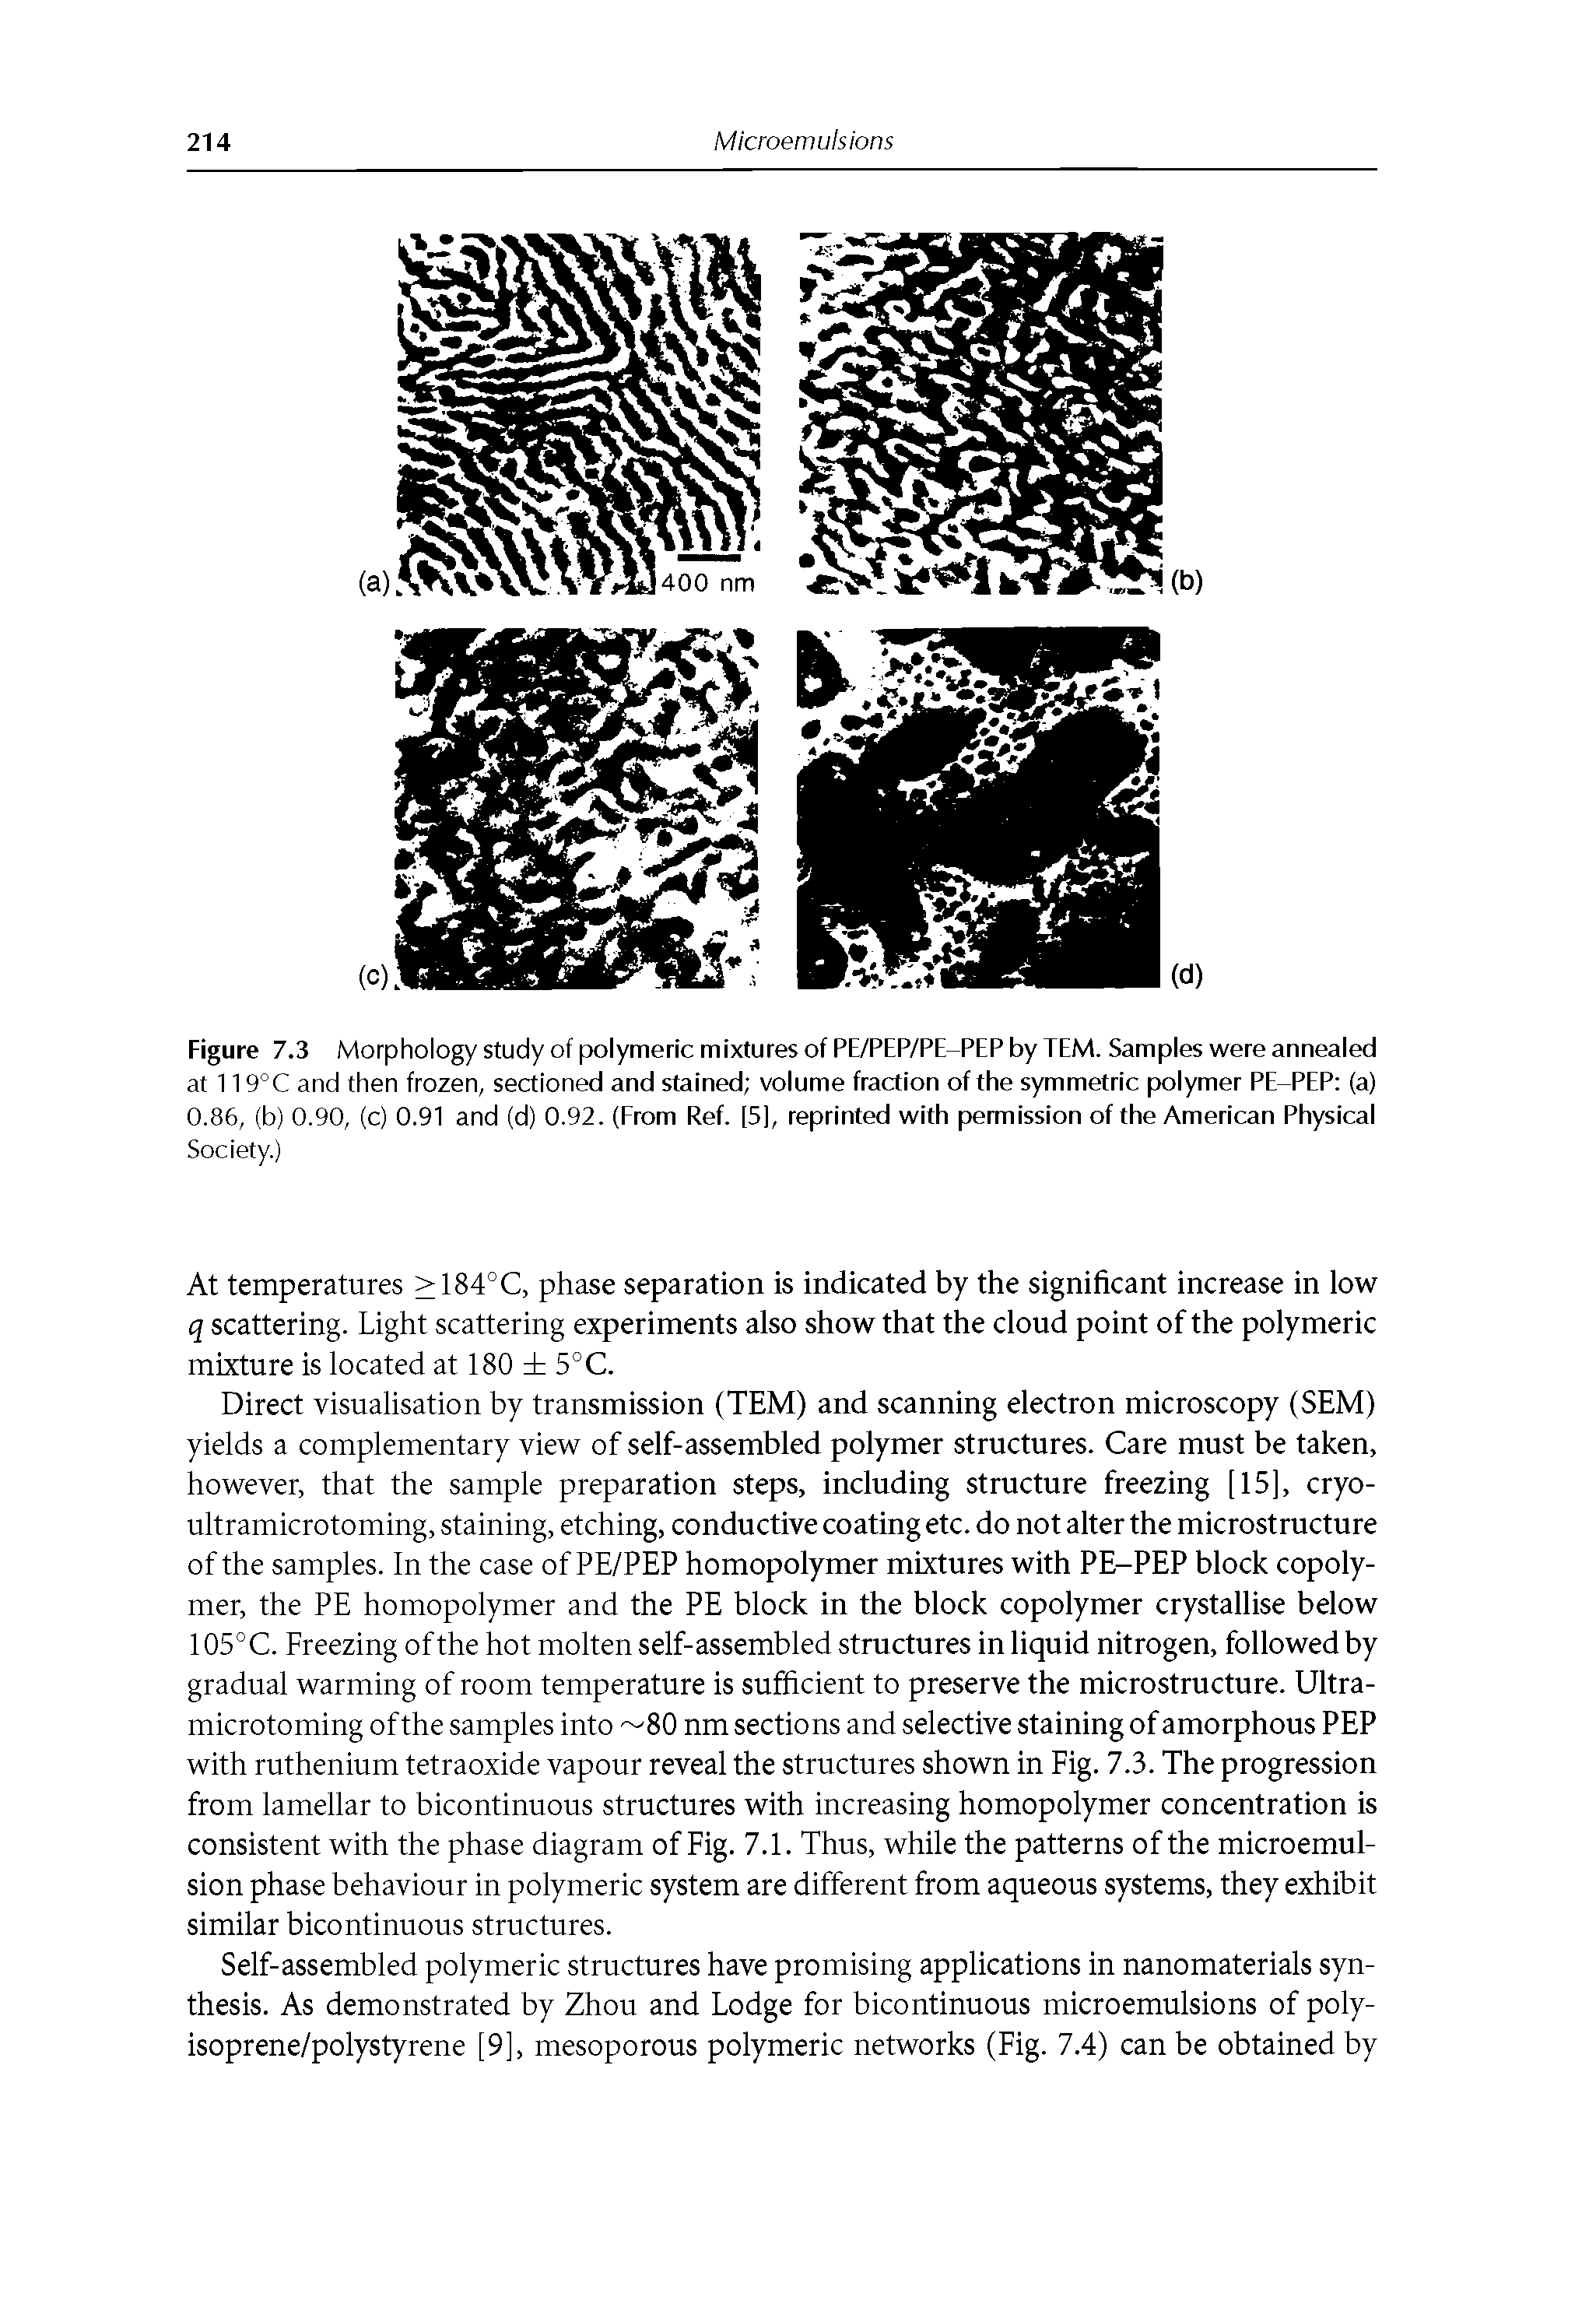 Figure 7.3 Morphology study of polymeric mixtures of PE/PEP/PE-PEP by TEM. Samples were annealed at 119°C and then frozen, sectioned and stained volume fraction of the symmetric polymer PE-PEP (a) 0.86, (b) 0.90, (c) 0.91 and (d) 0.92. (From Ref. [5], reprinted with permission of the American Physical...